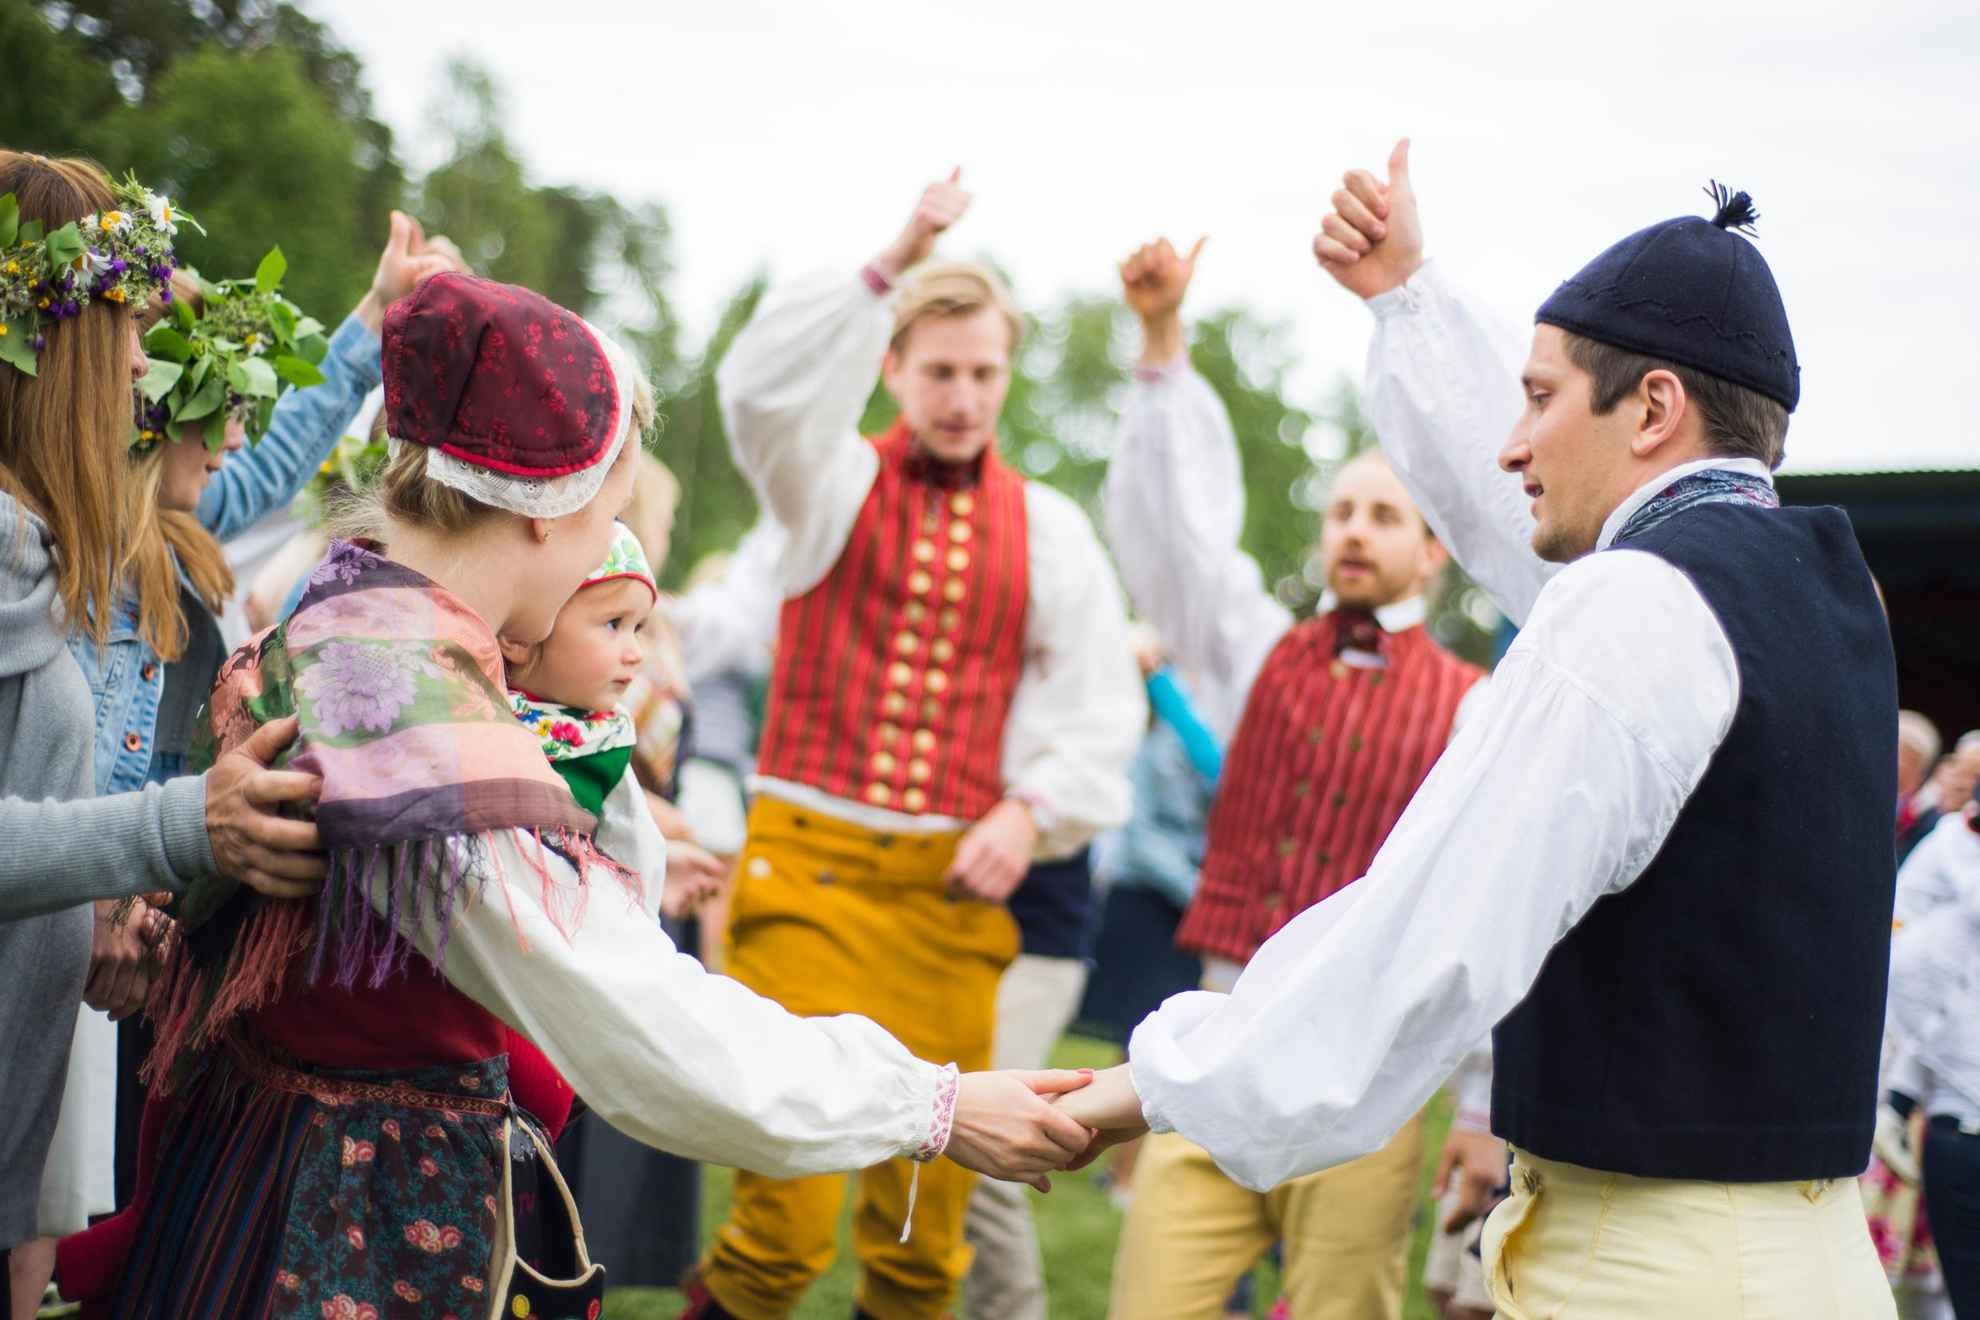 Men, women and children are holding hands and dancing, wearing traditional folk clothing.